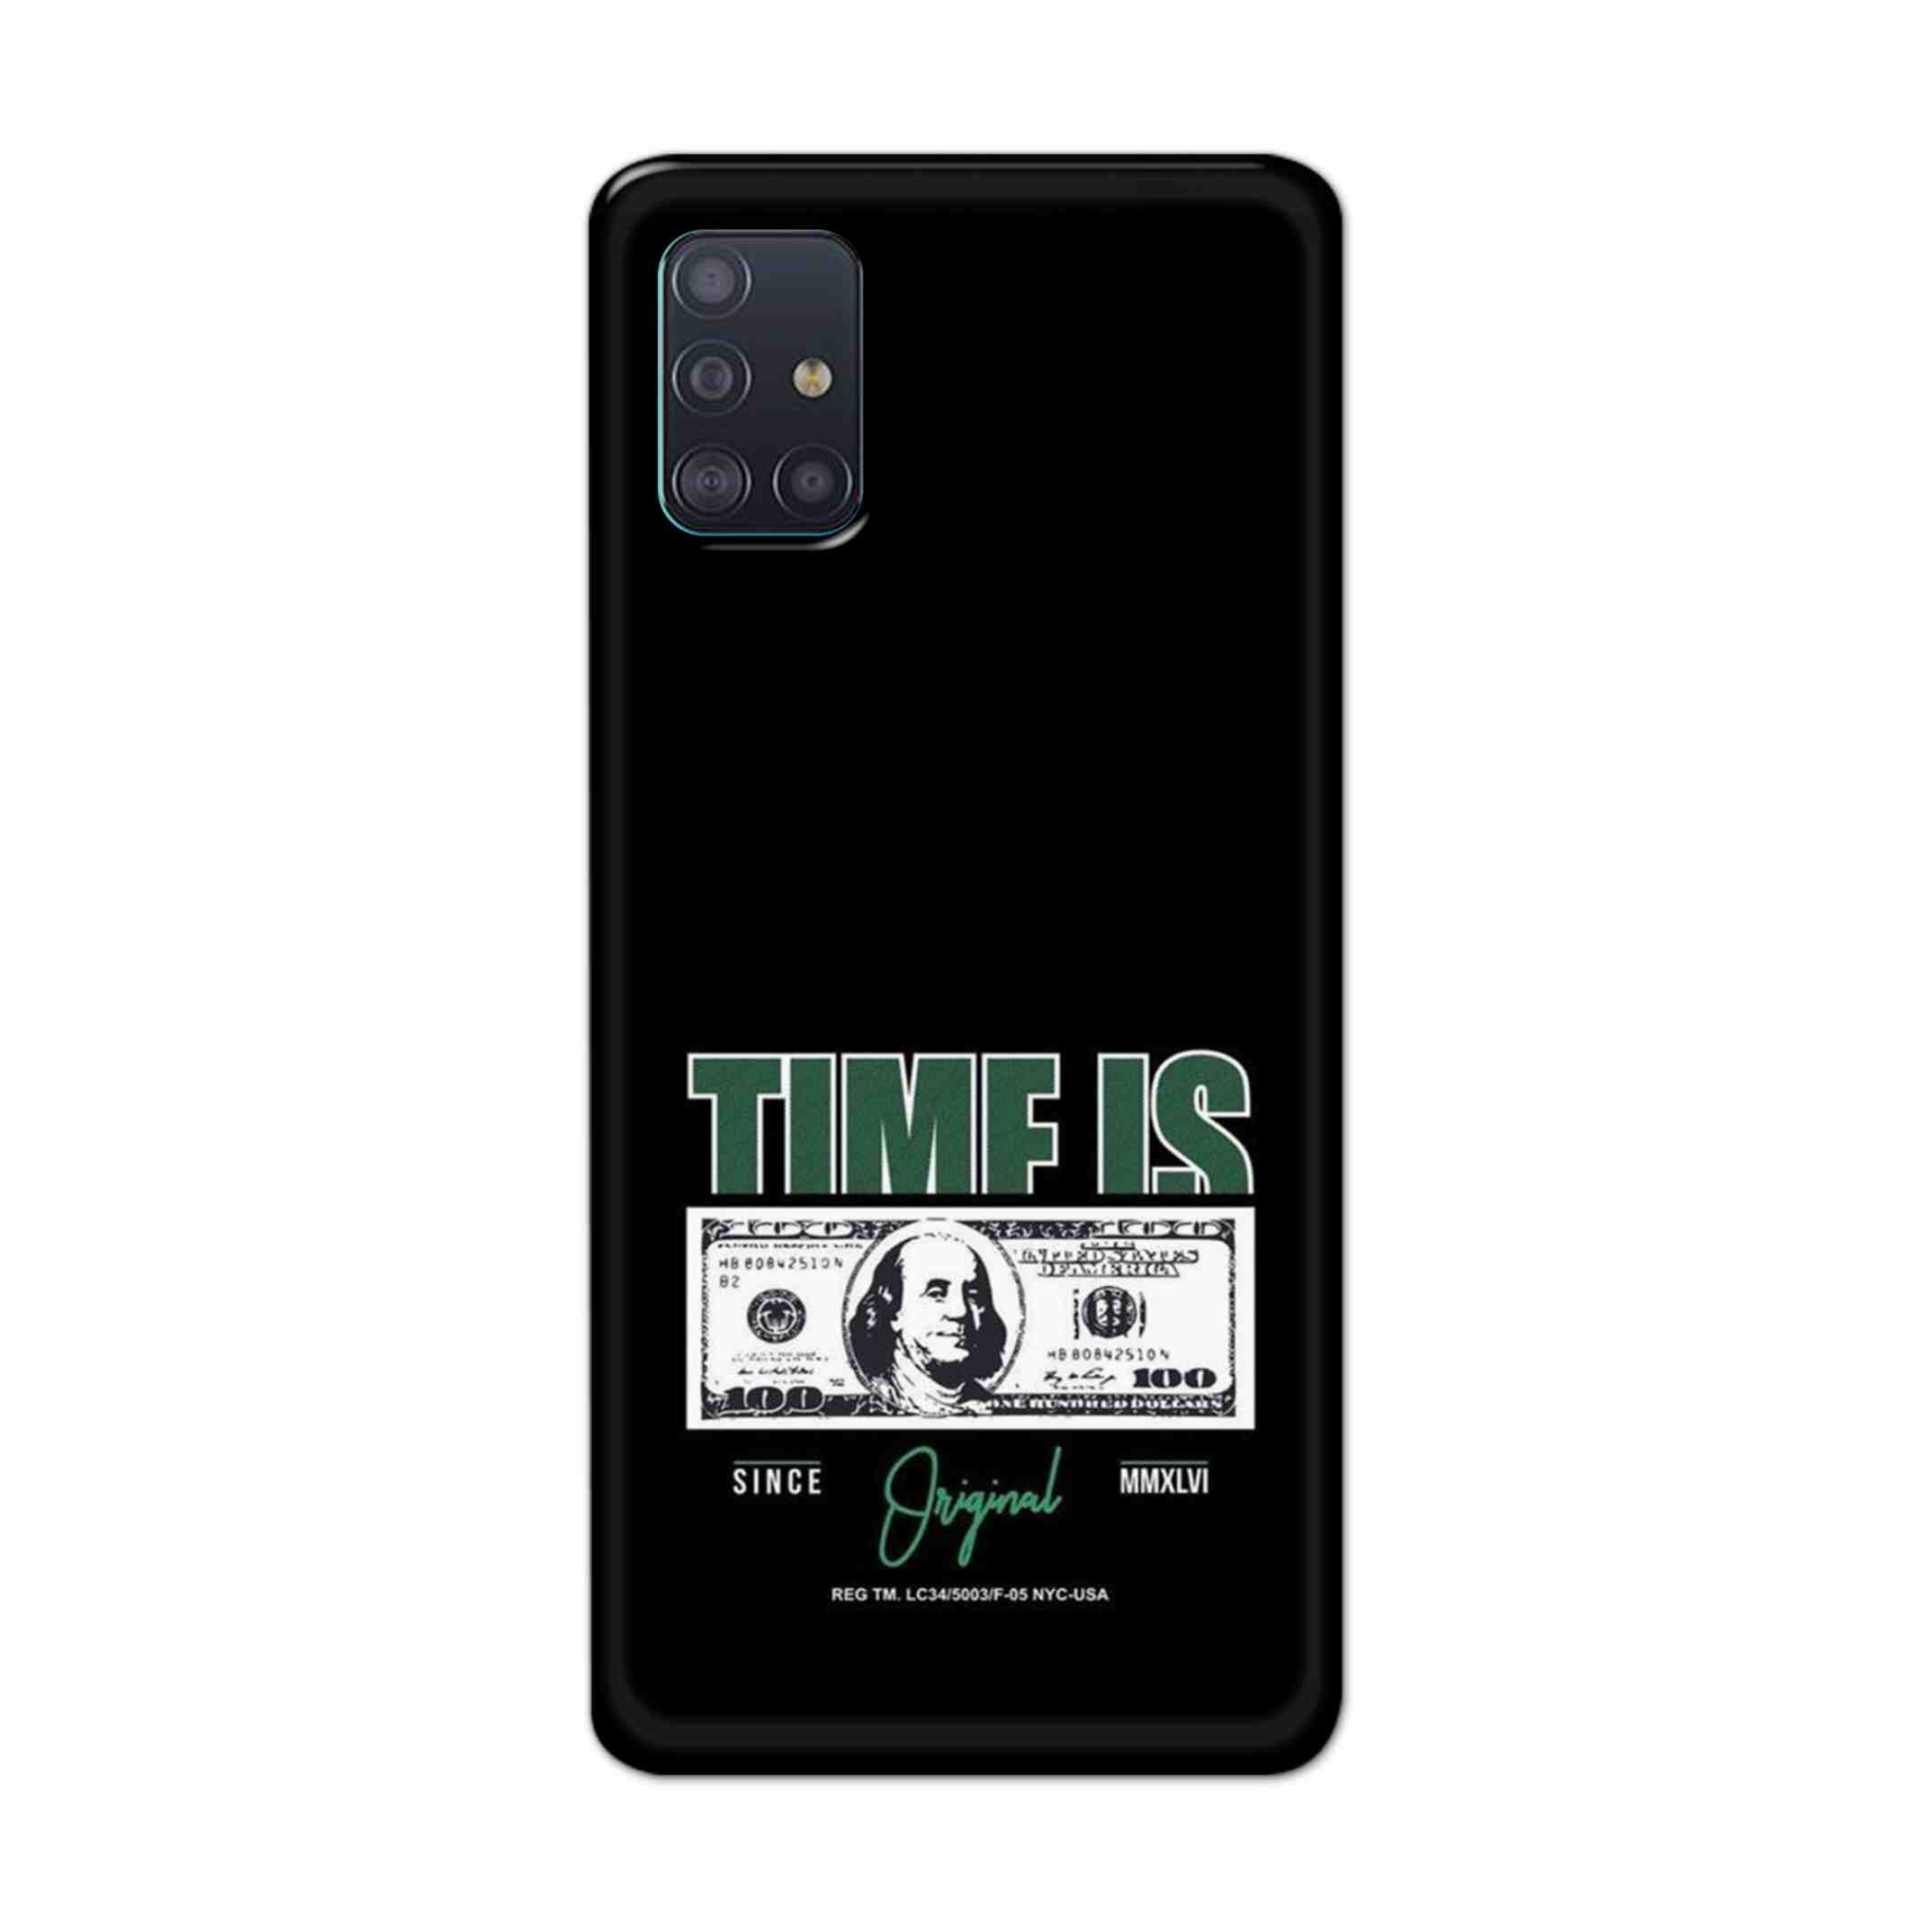 Buy Time Is Money Hard Back Mobile Phone Case Cover For Samsung Galaxy A71 Online